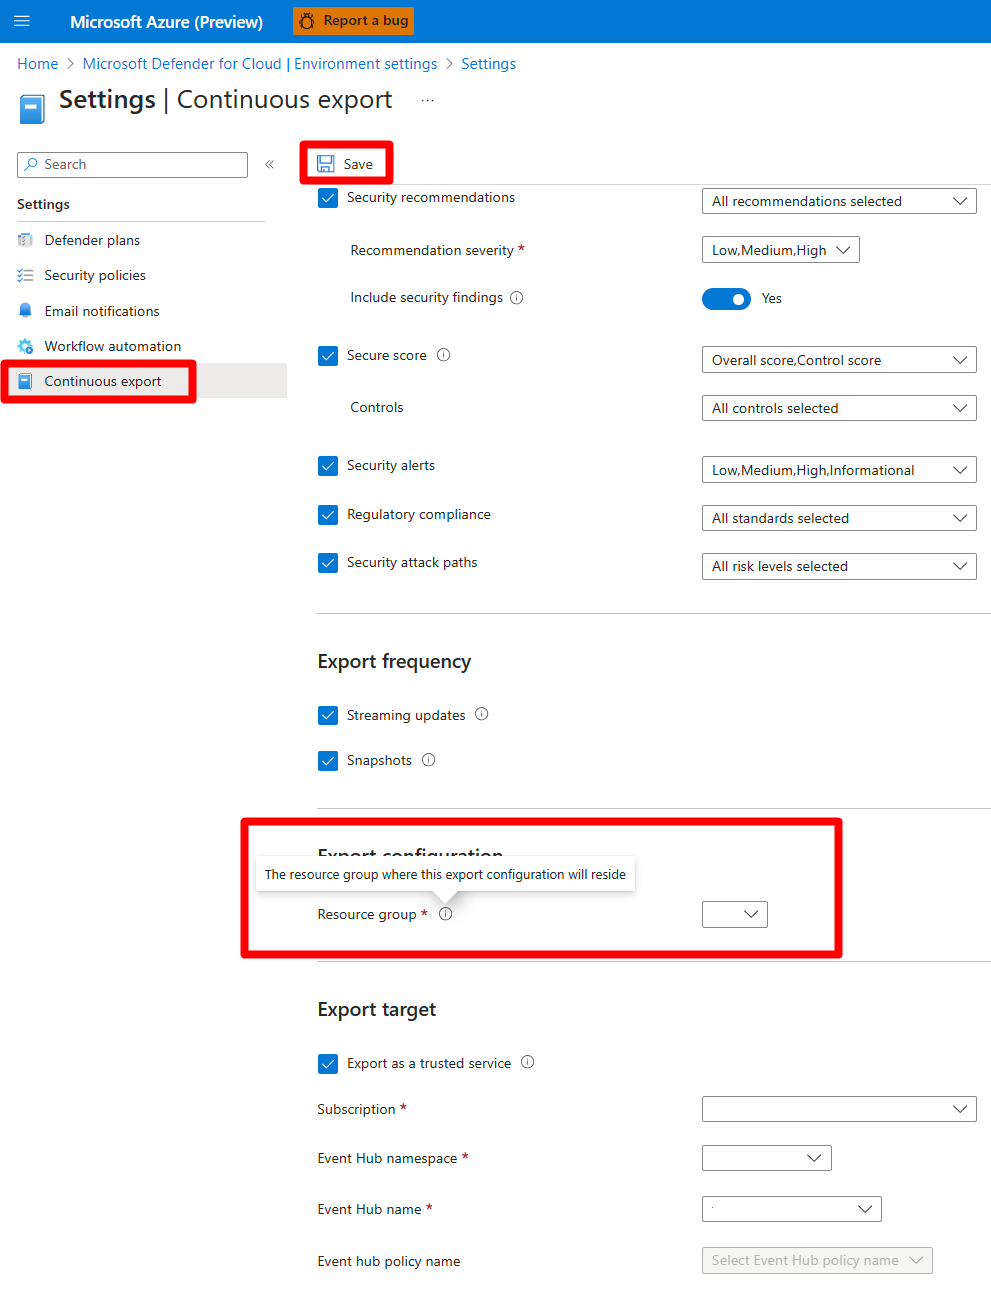 Export options in Microsoft Defender for Cloud.